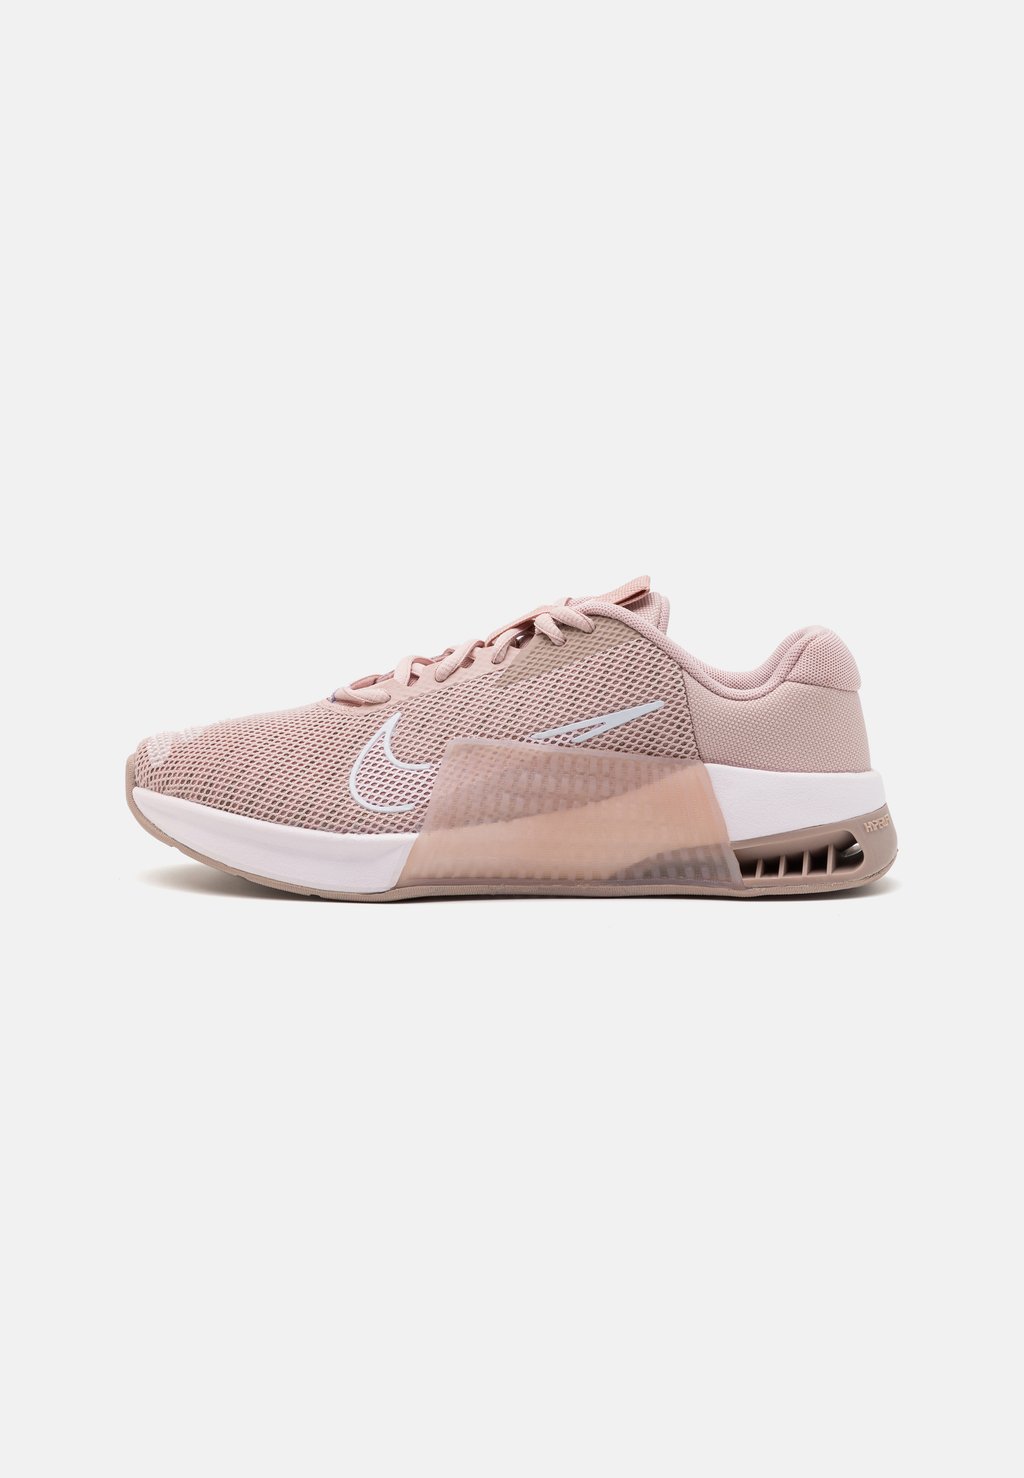 цена Кроссовки METCON 9 Nike, цвет pink oxford/white/diffused taupe/pearl pink